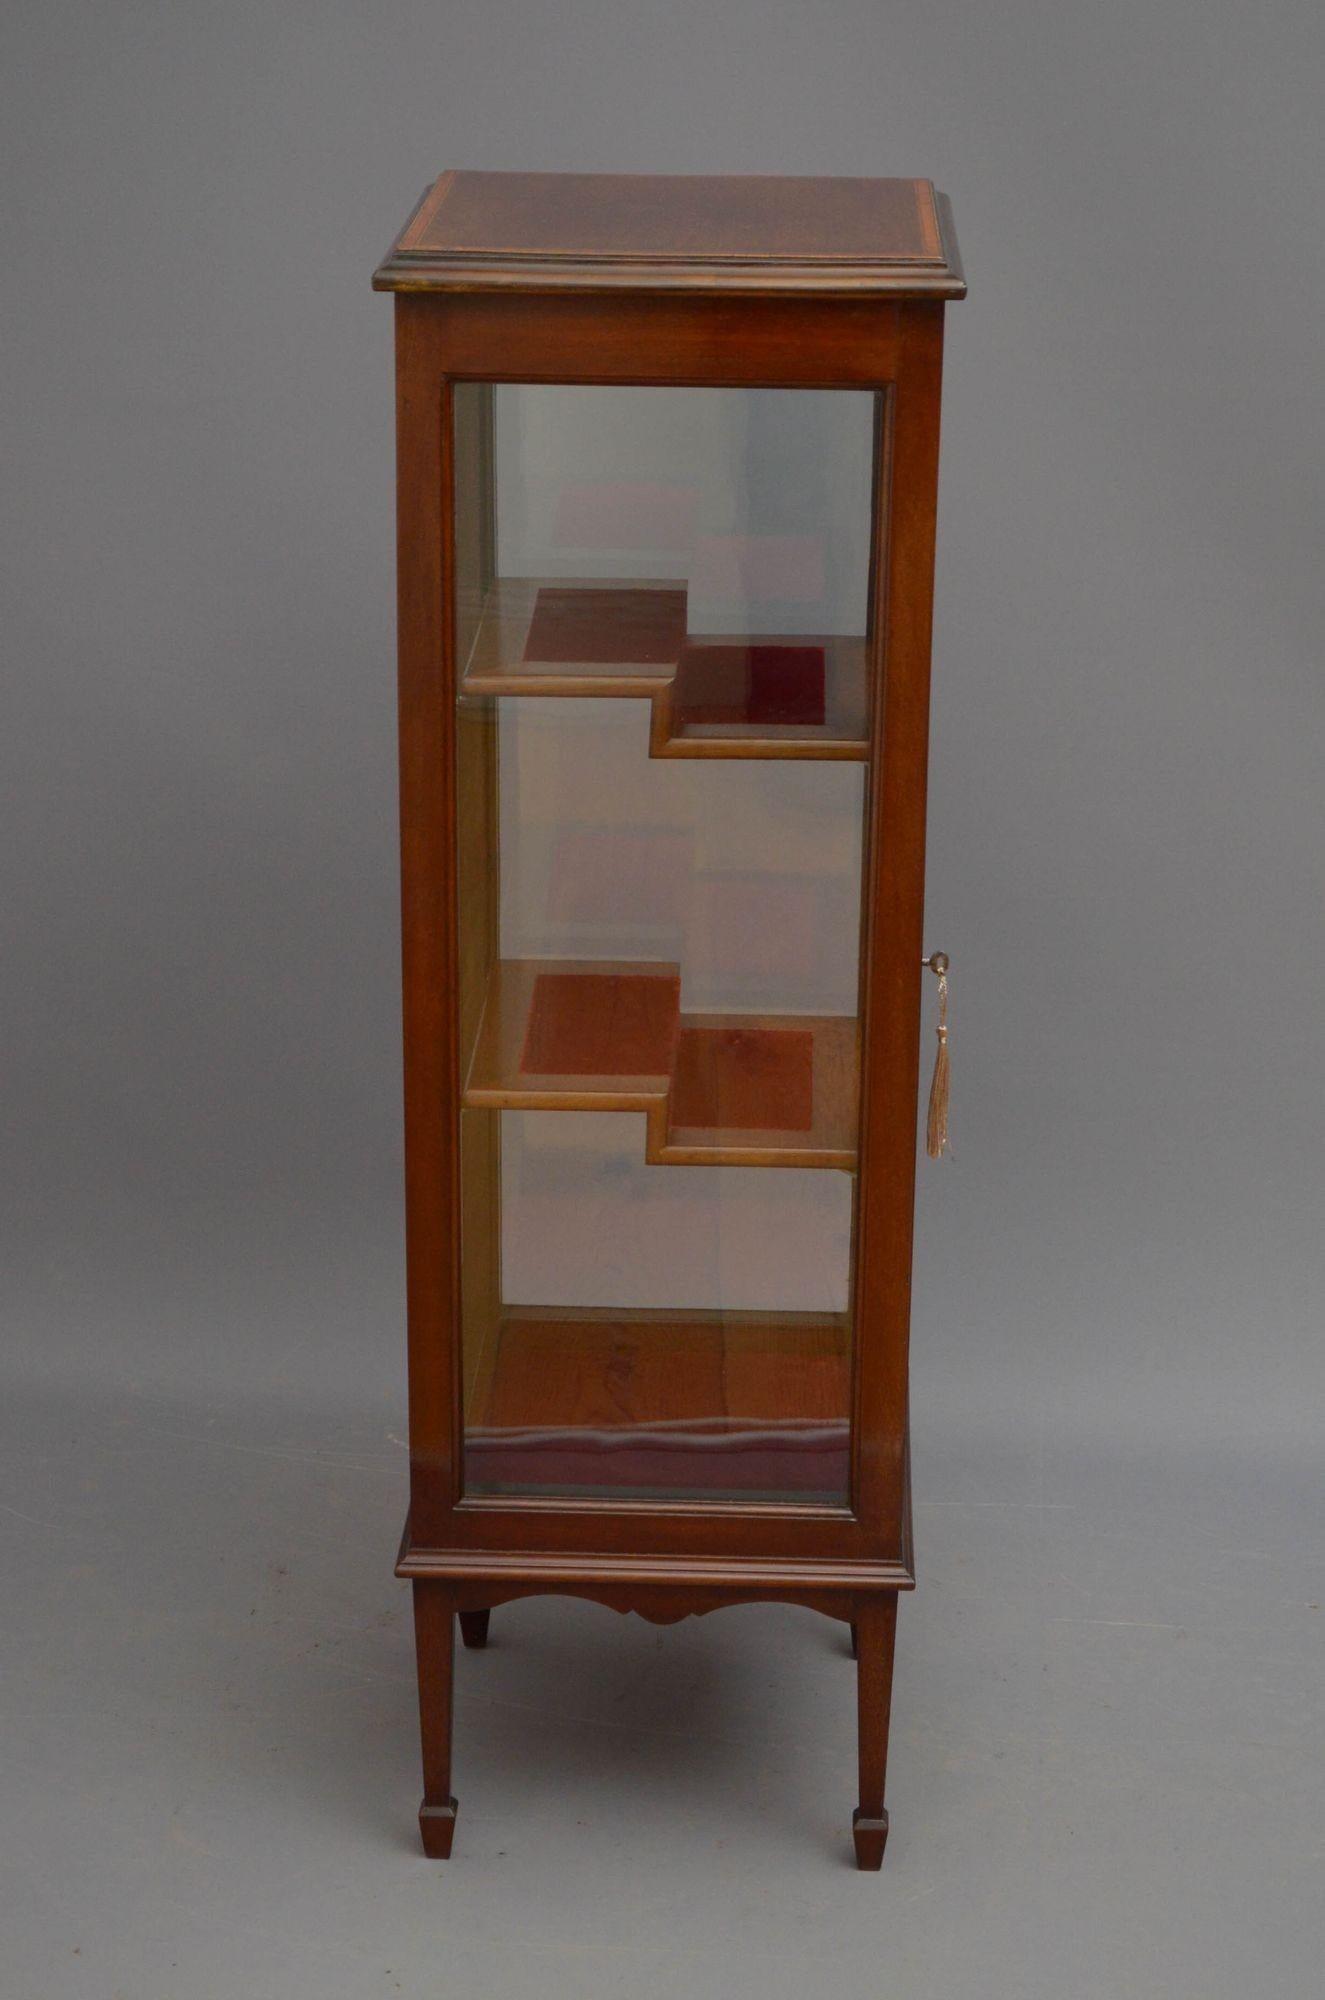 Edwardian Mahogany Display Cabinet Vitrine In Good Condition For Sale In Whaley Bridge, GB